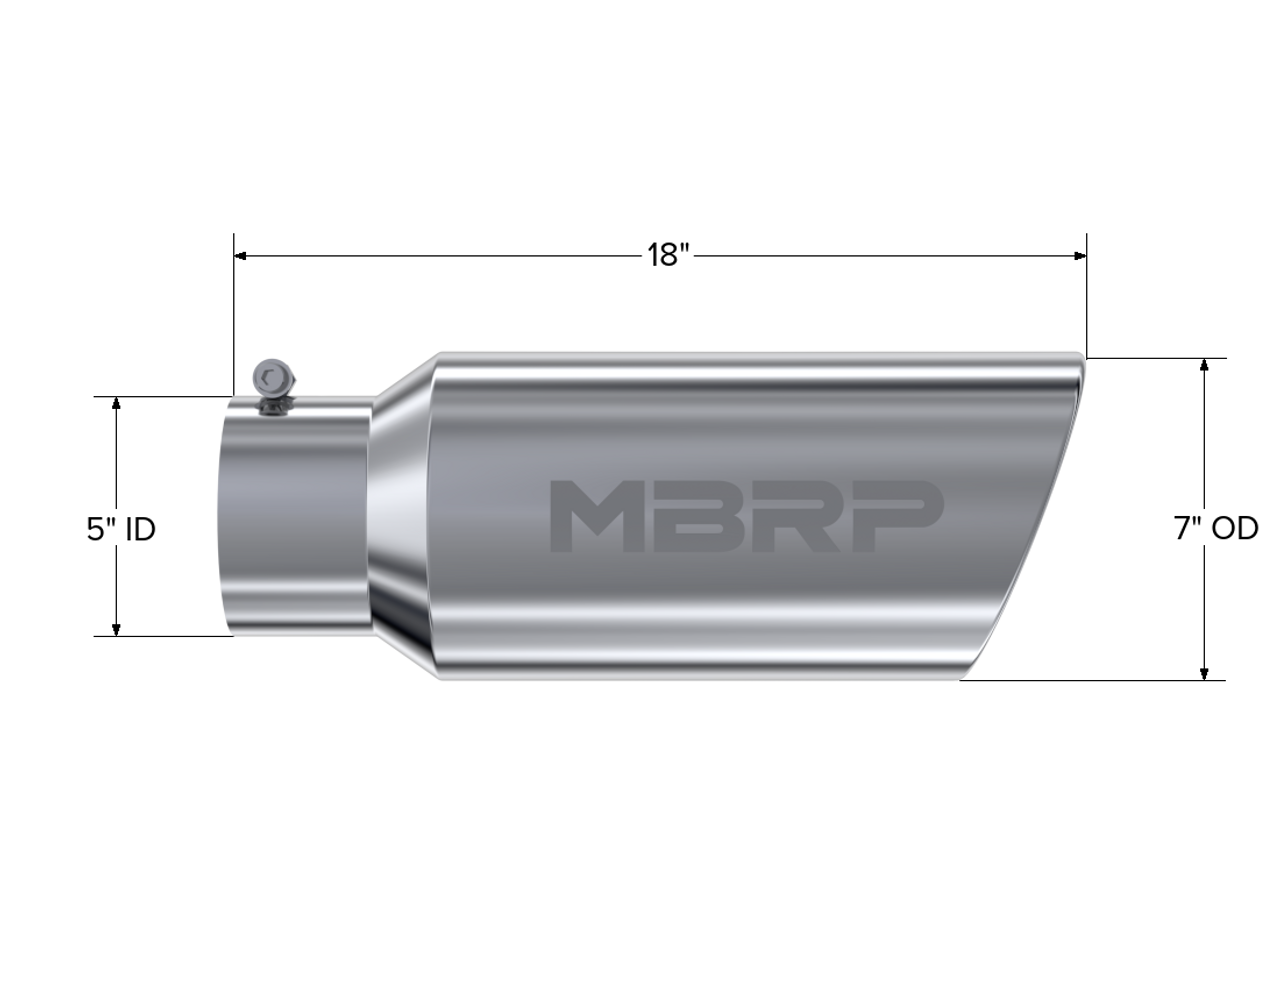 MBRP DIESEL EXHAUST TIP 5" INLET ROLLED END 7" OUTLET 18" LENGTH